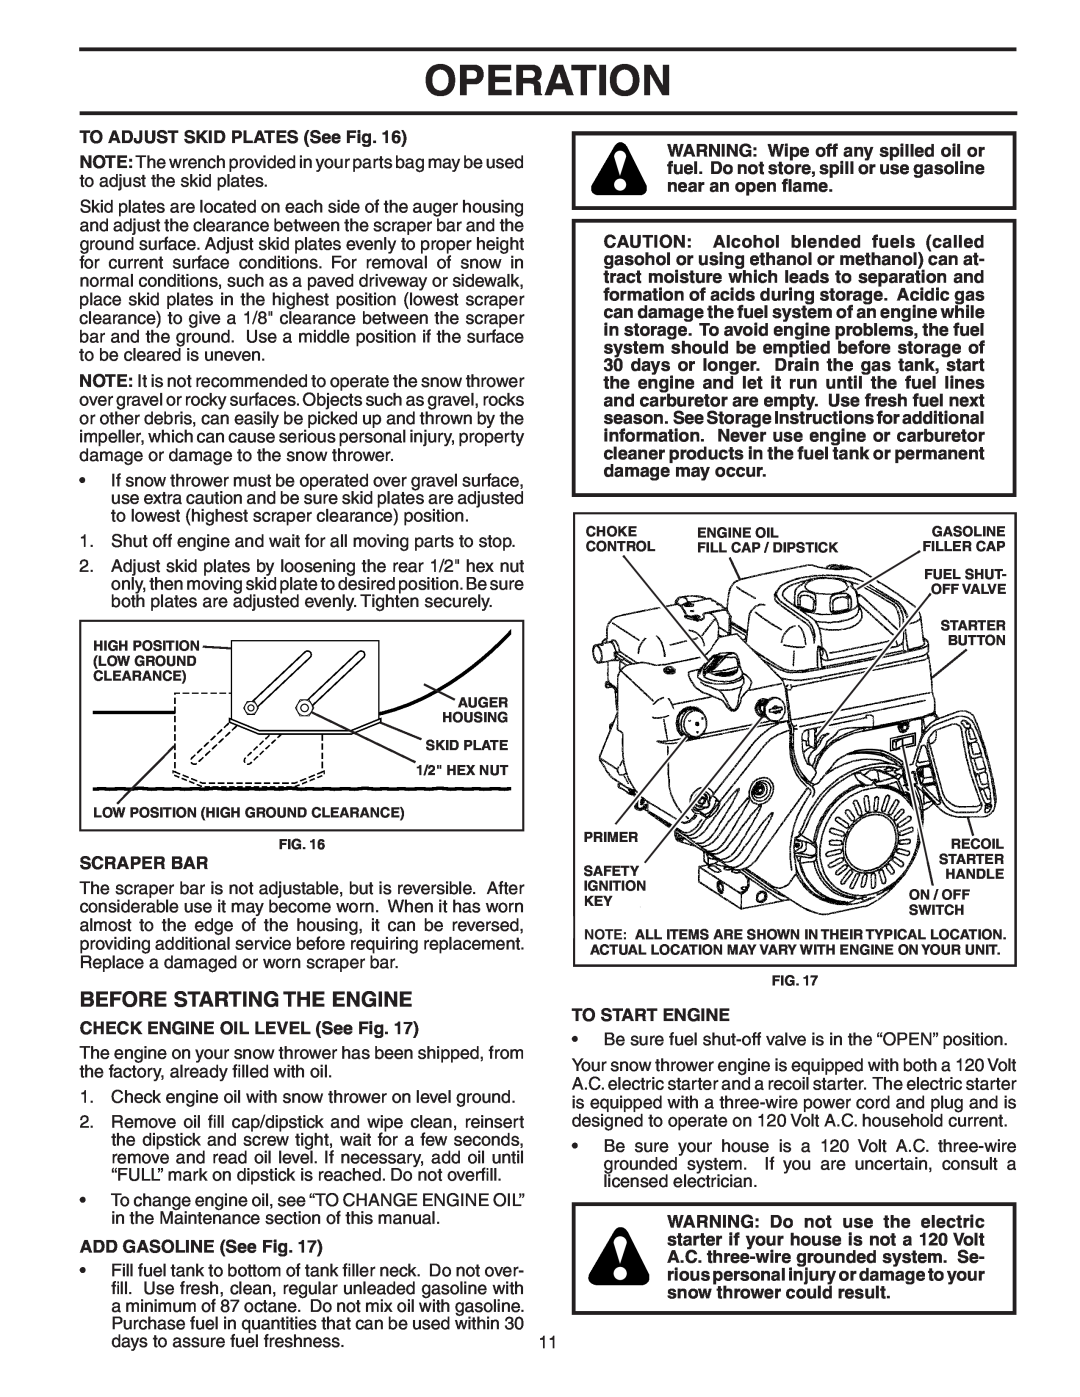 Poulan 403919 Before Starting The Engine, Operation, TO ADJUST SKID PLATES See Fig, Scraper Bar, ADD GASOLINE See Fig 